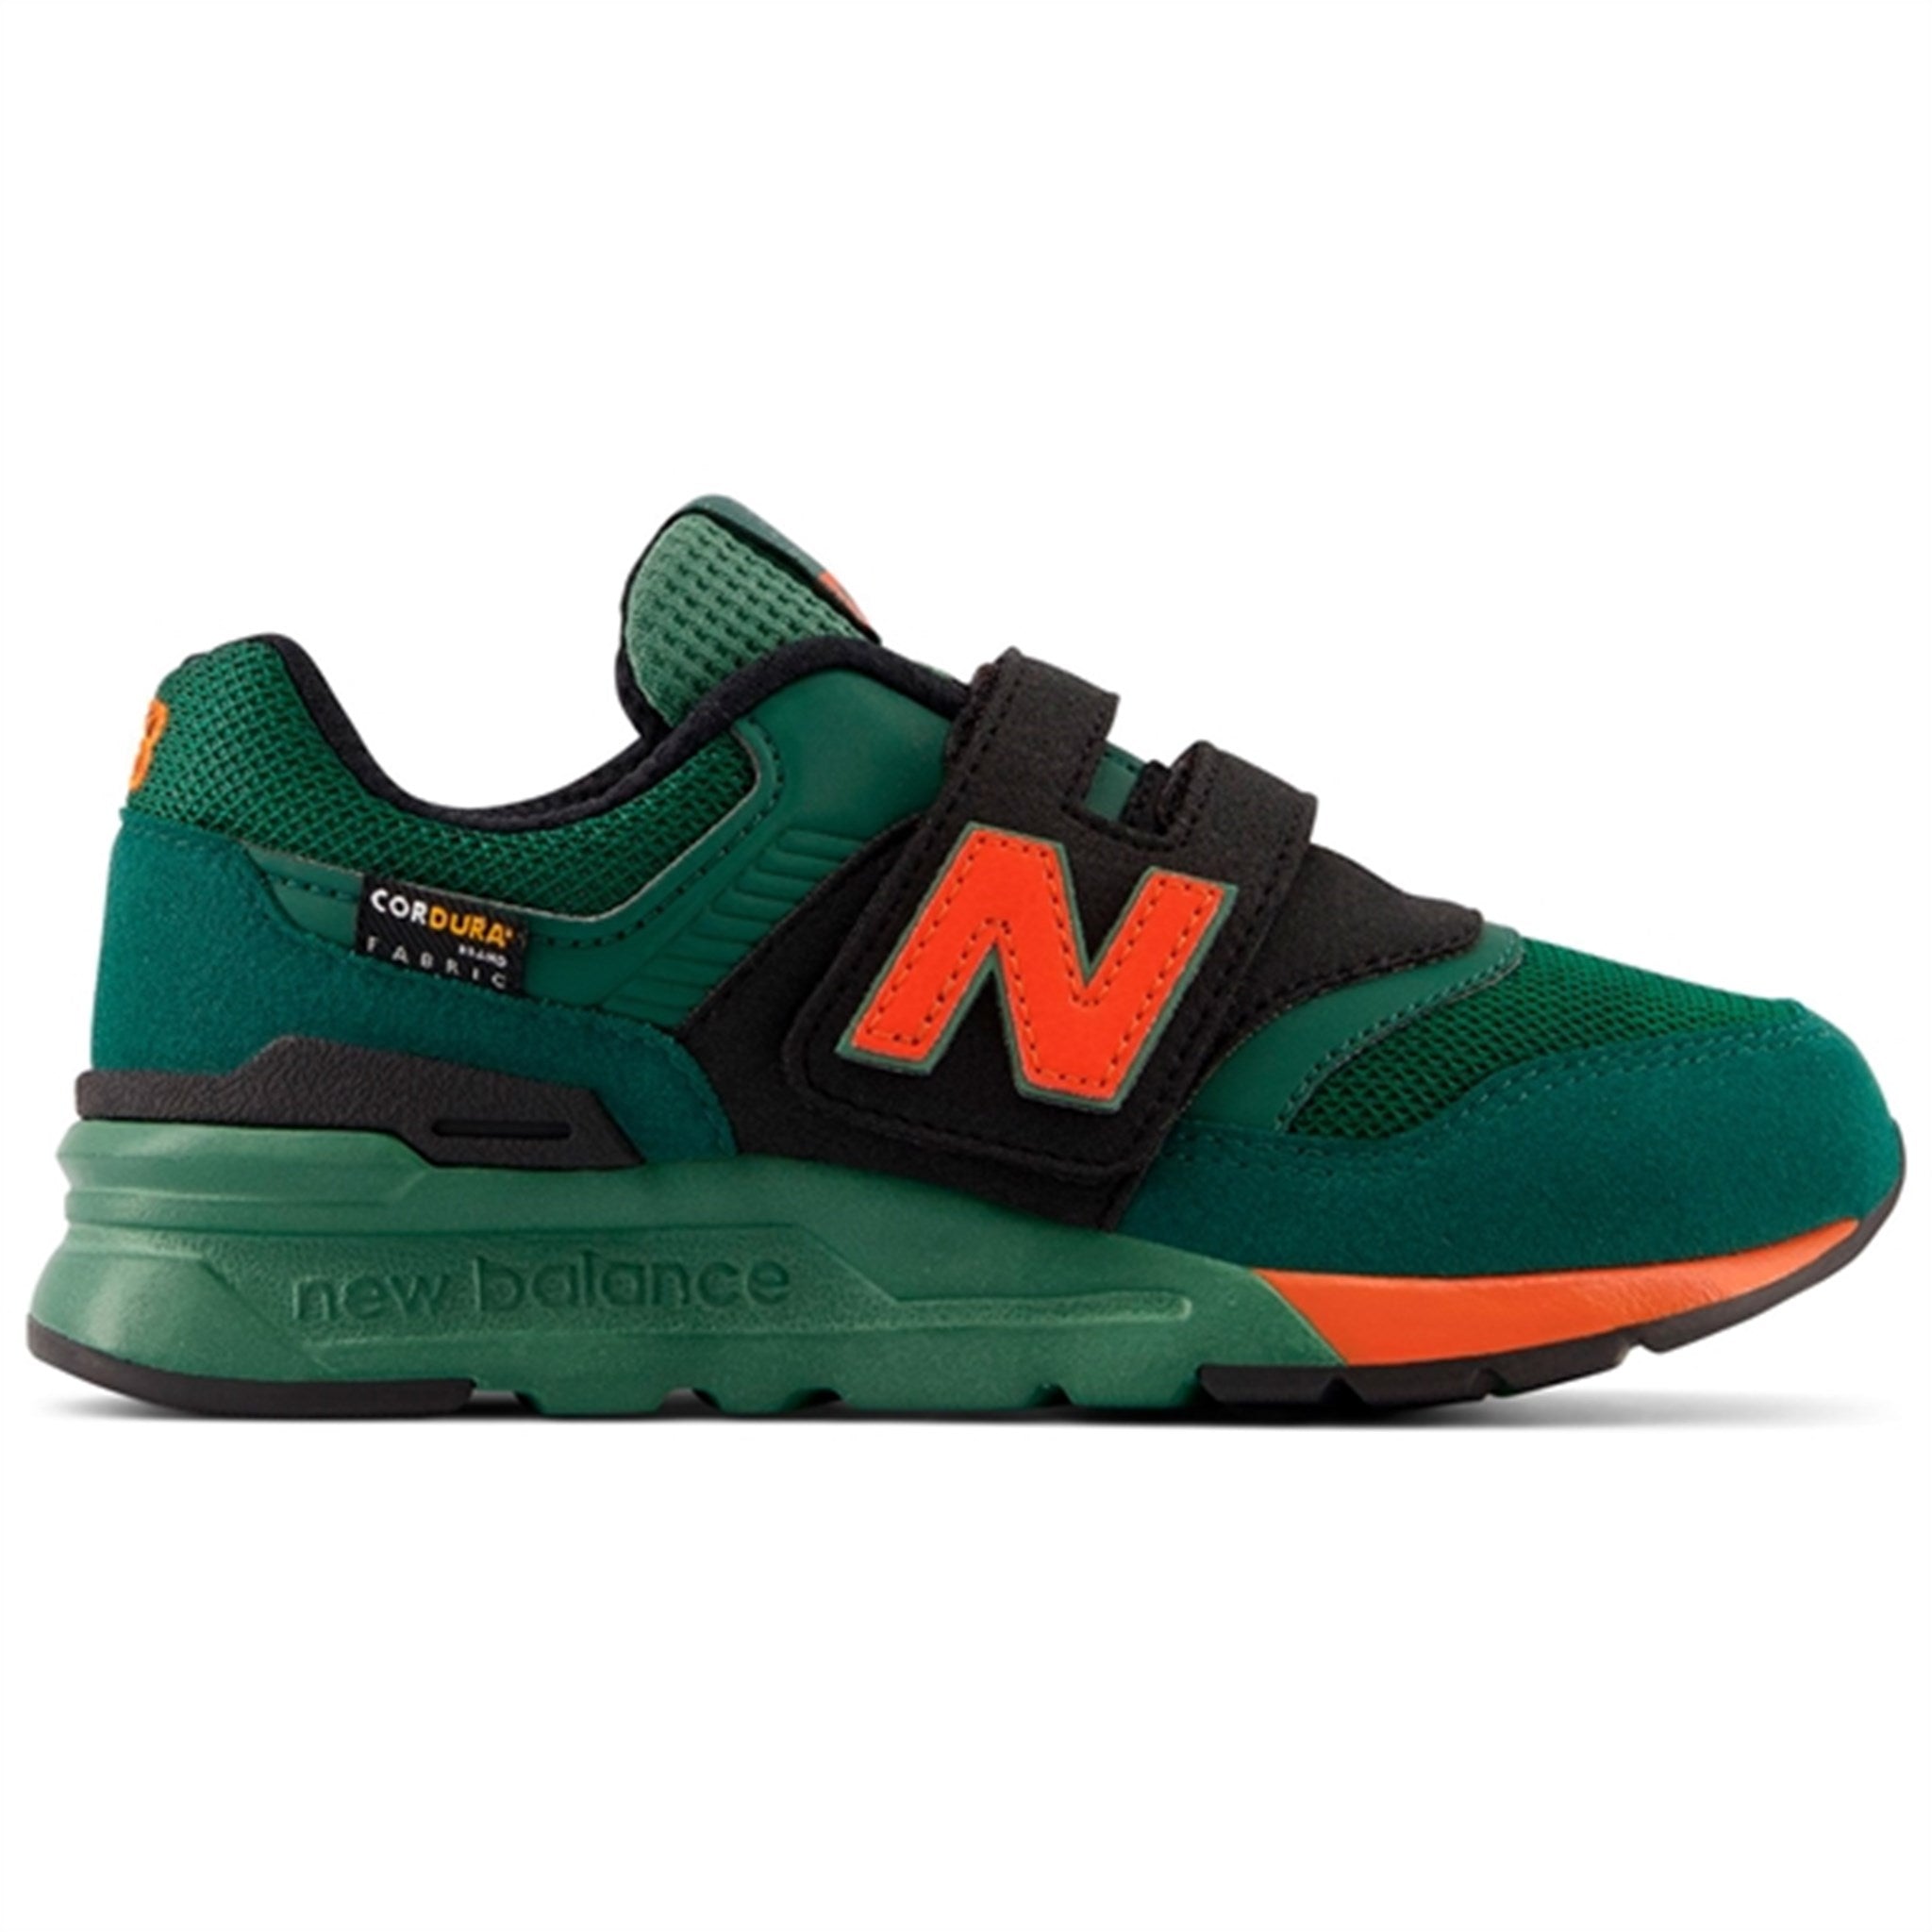 New Balance 997H Sneakers Nightwatch Green